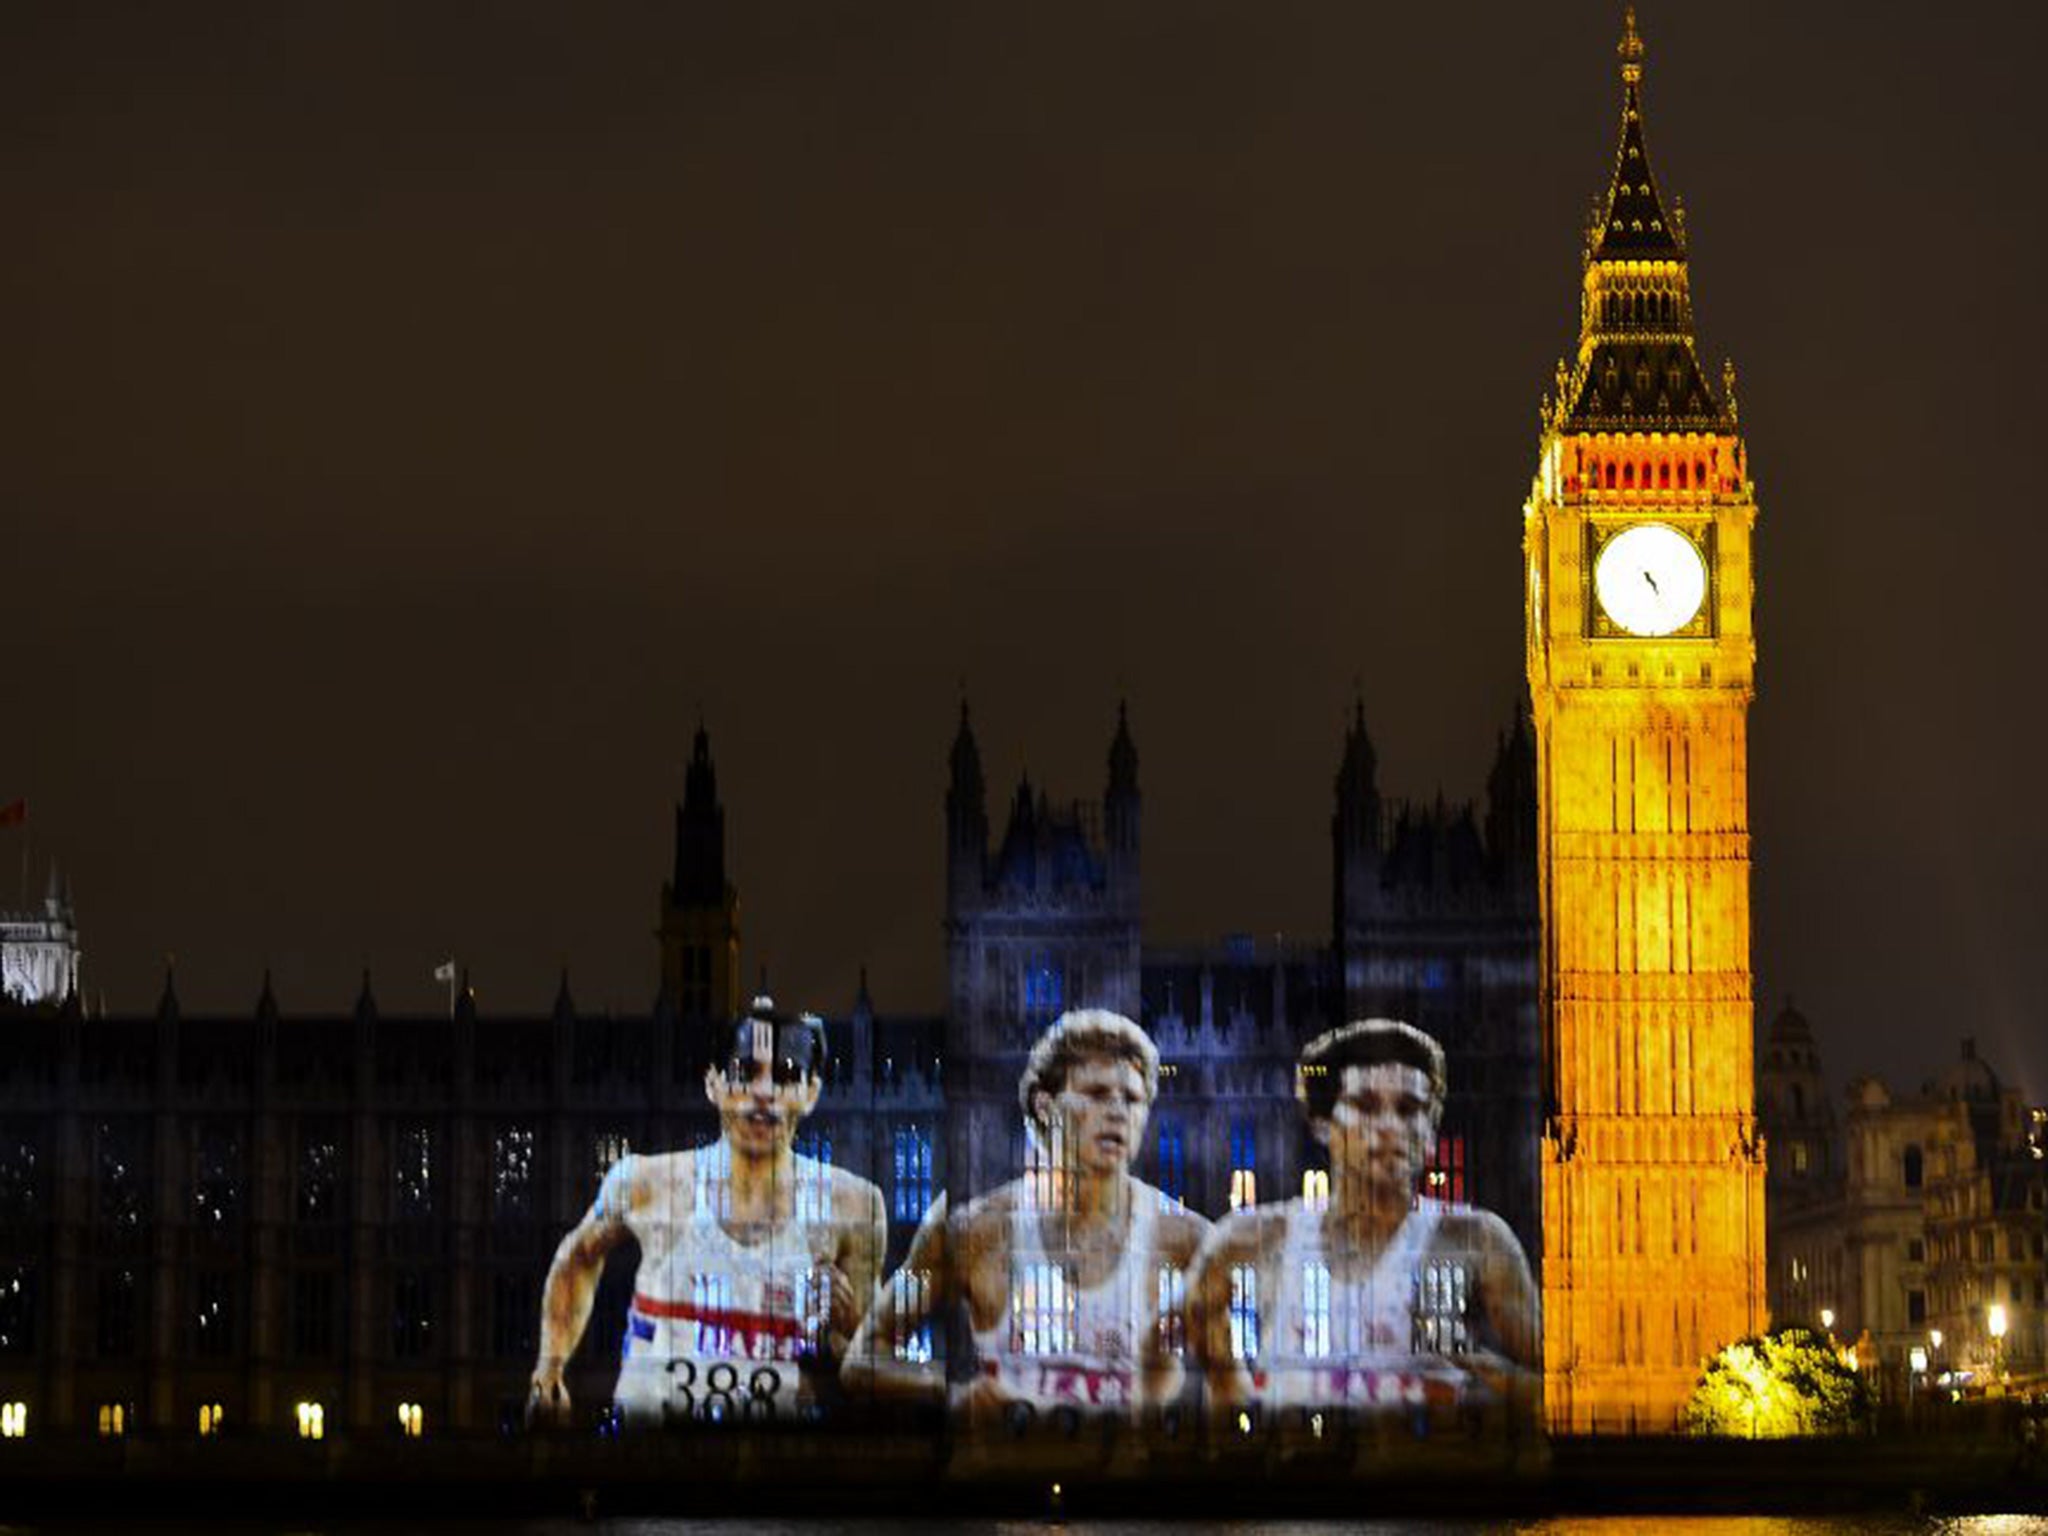 An image of the former British Olympians (left to right) Steve Ovett, Steve Cram and Sebastian Coe is projected on the Houses of Parliament during the summer opening ceremony of the London 2012 Olympic Games